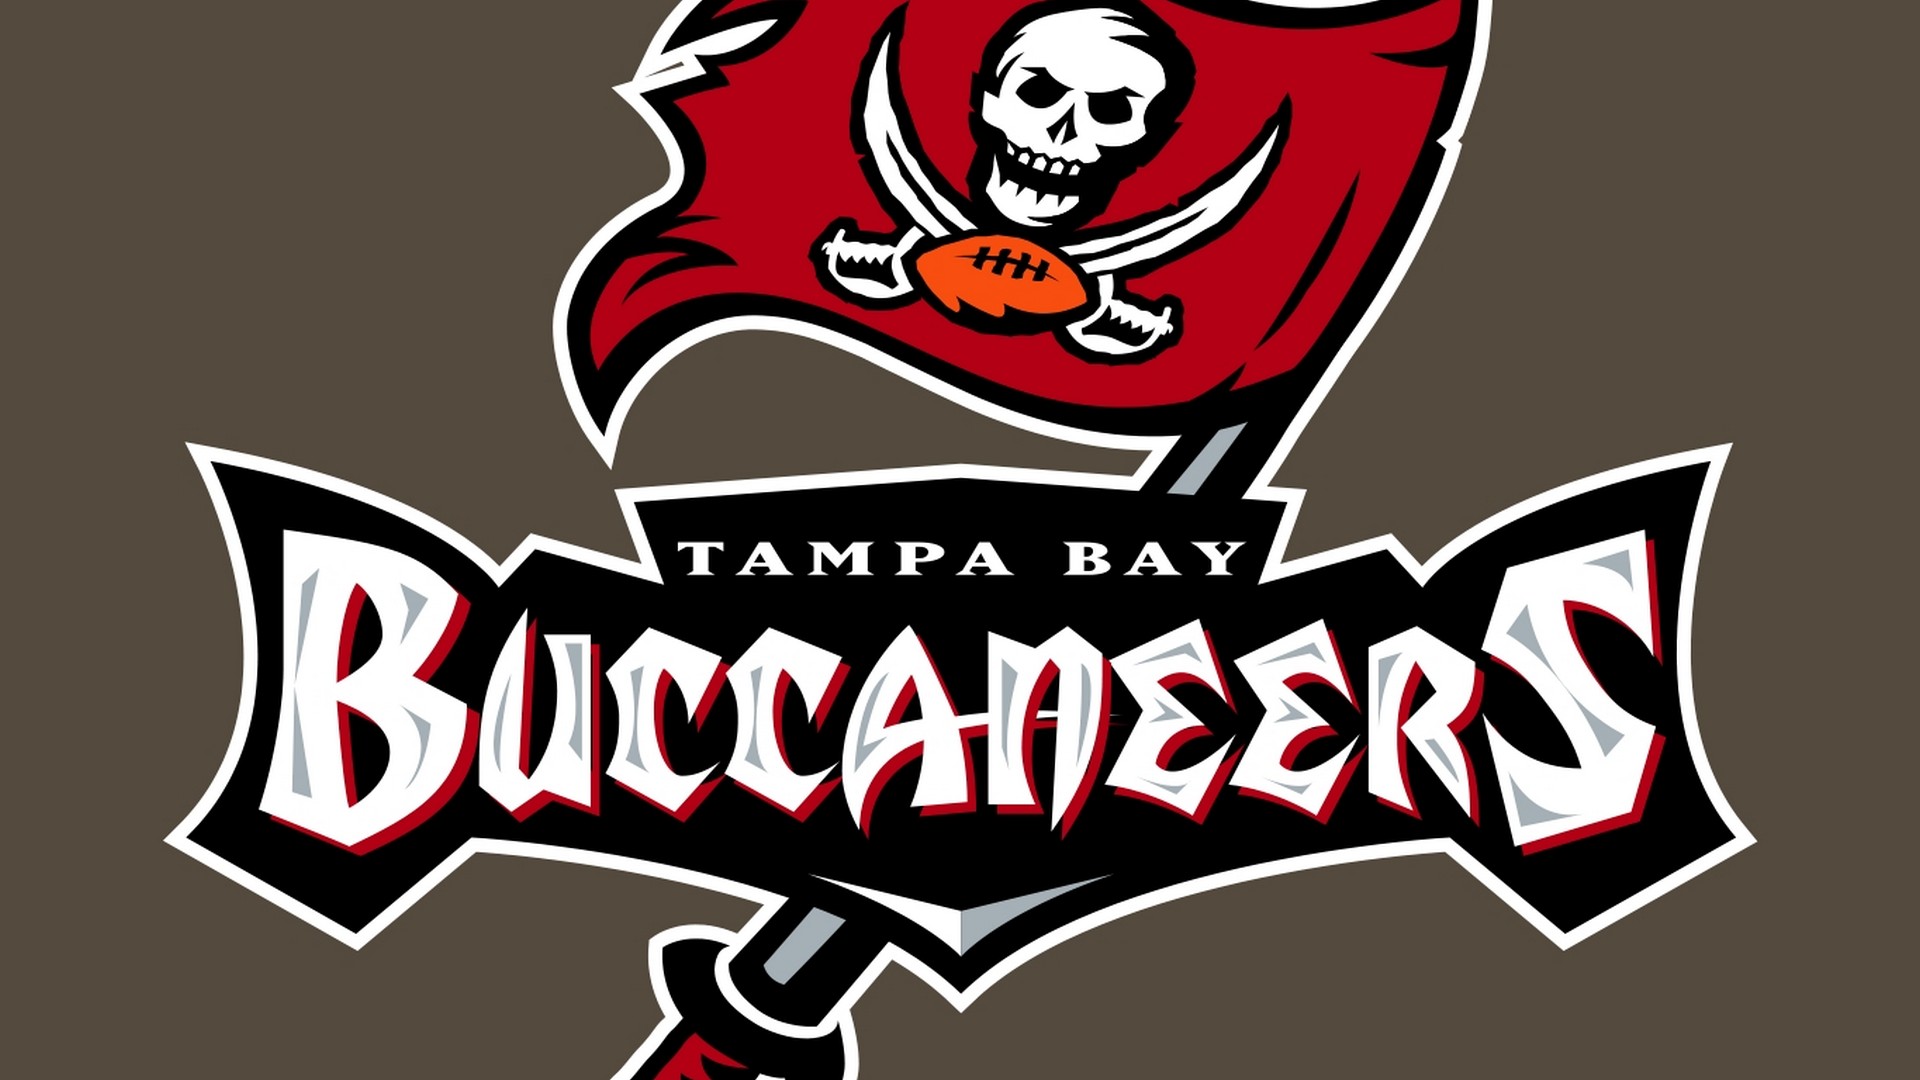 Best Buccaneers Wallpaper in HD with high-resolution 1920x1080 pixel. Download and set as wallpaper for Desktop Computer, Apple iPhone X, XS Max, XR, 8, 7, 6, SE, iPad, Android